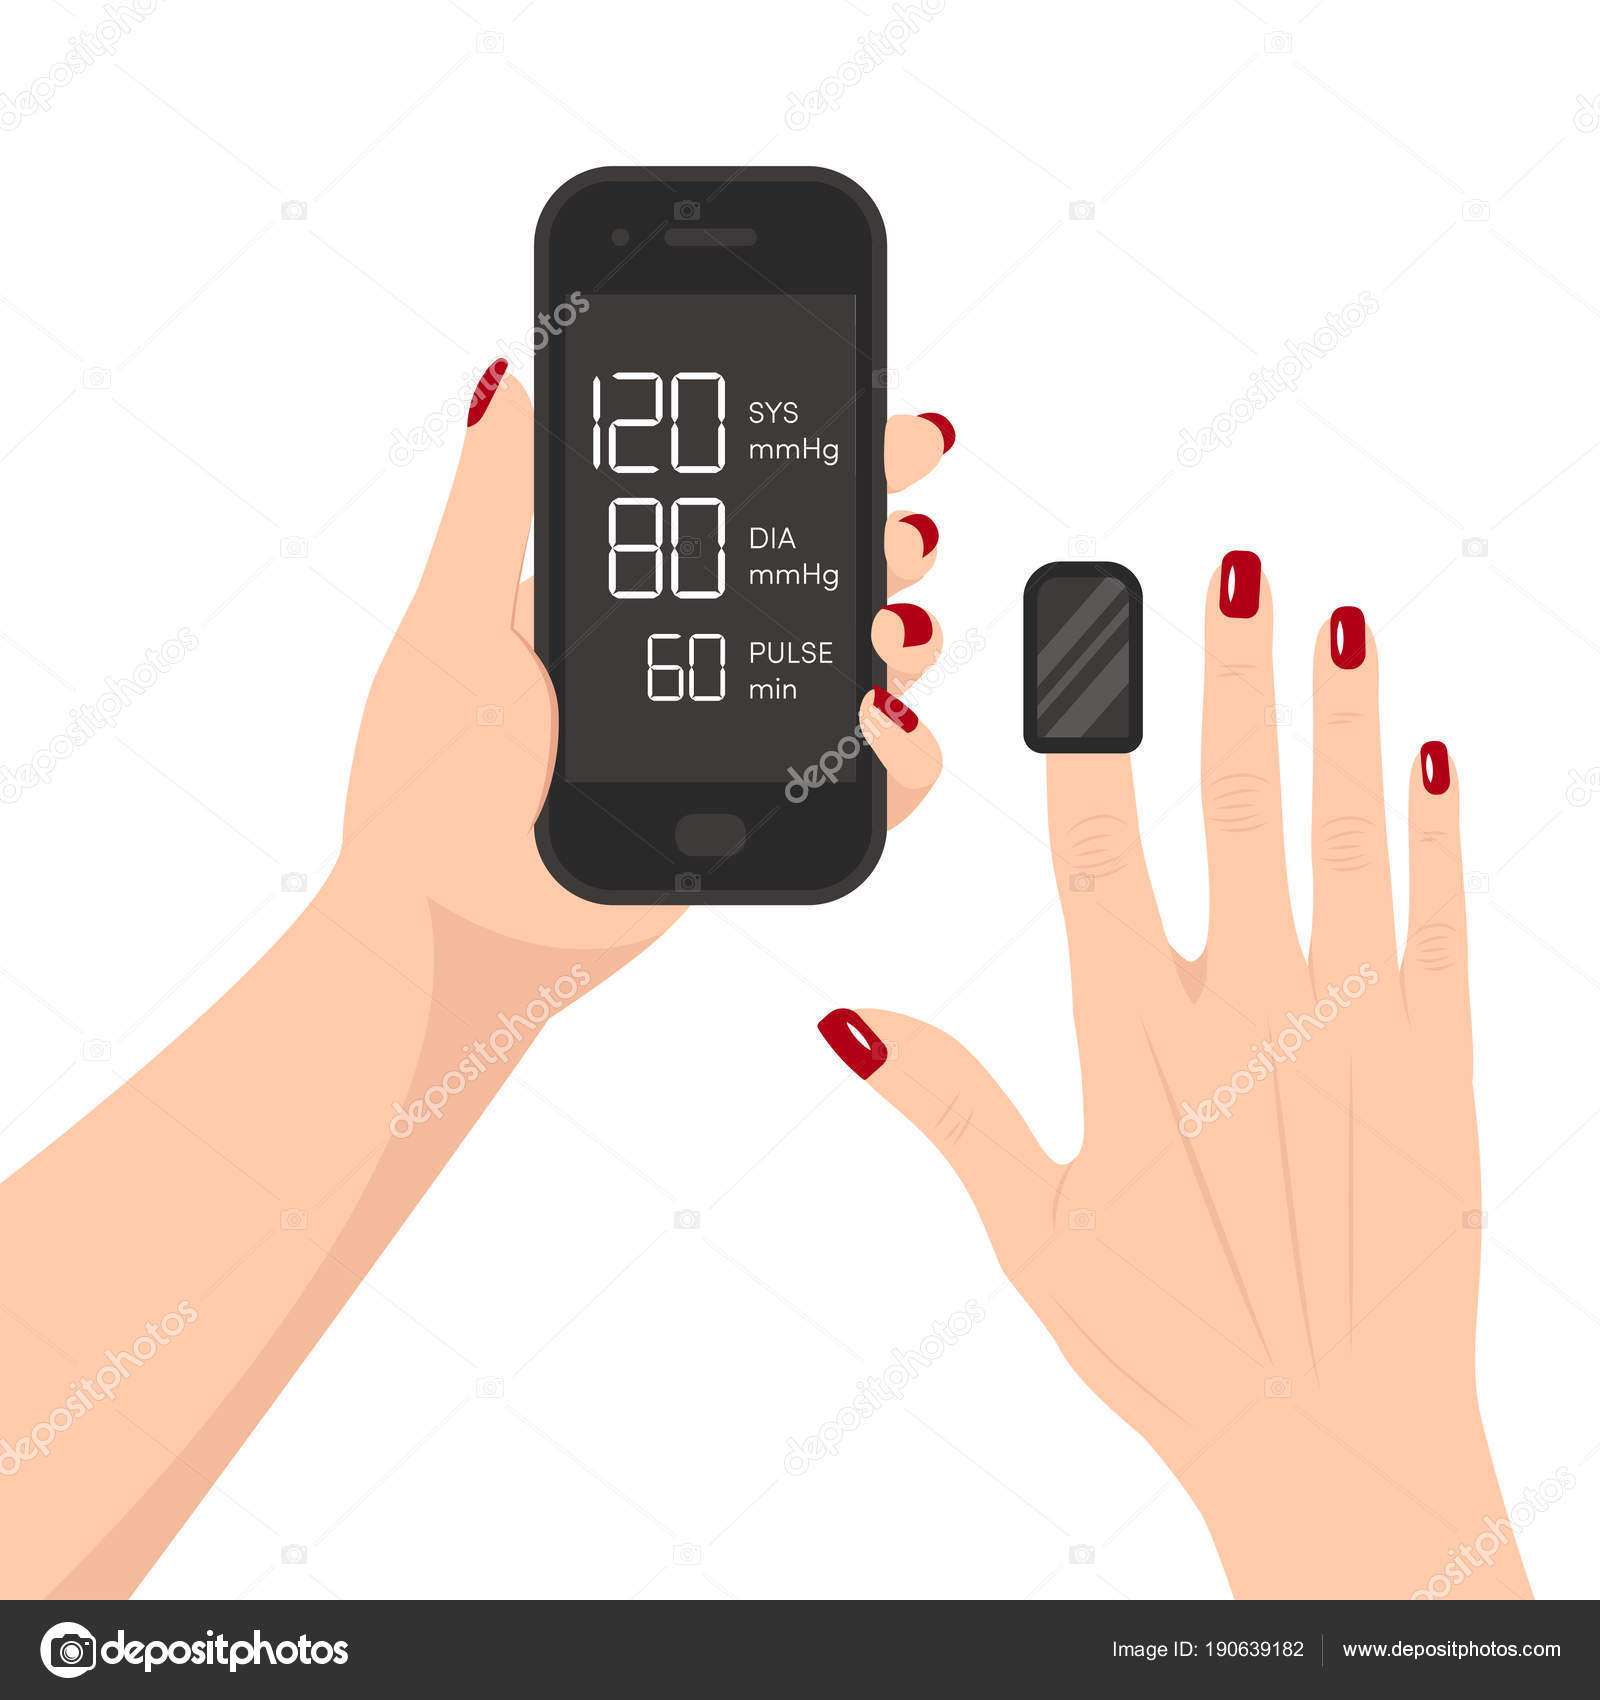 Finger Monitor Uses Smartphone Features to Detect Blood Pressure